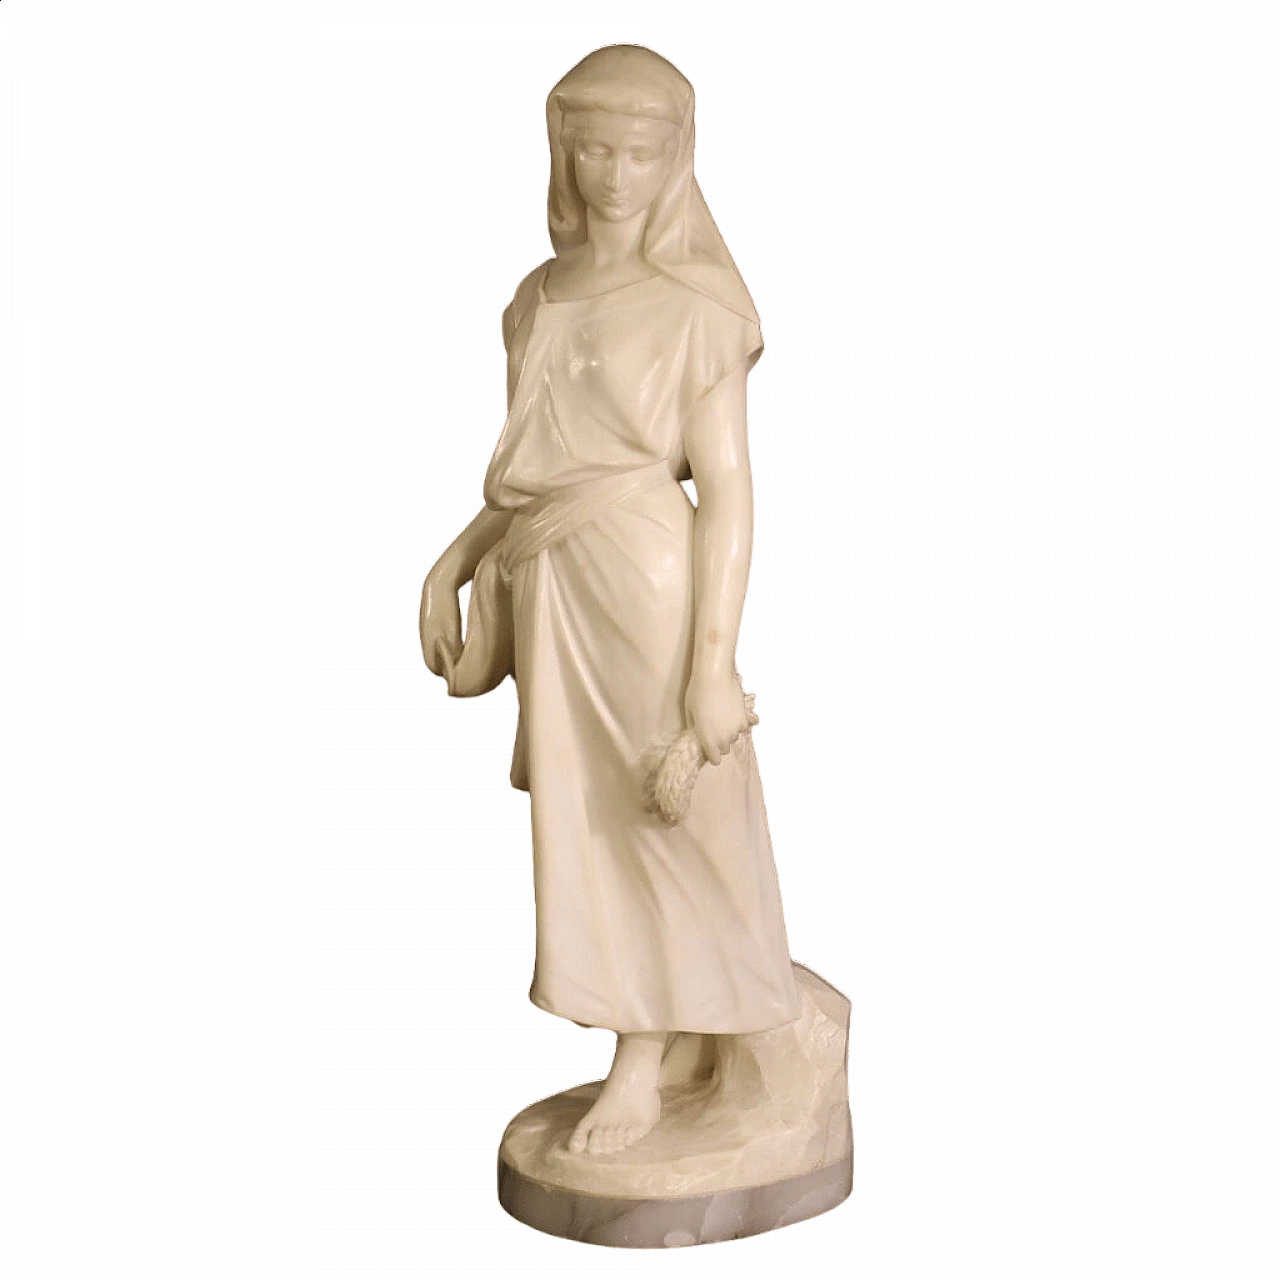 Leon Grégoire, young gleaner, alabaster sculpture, late 19th century 13